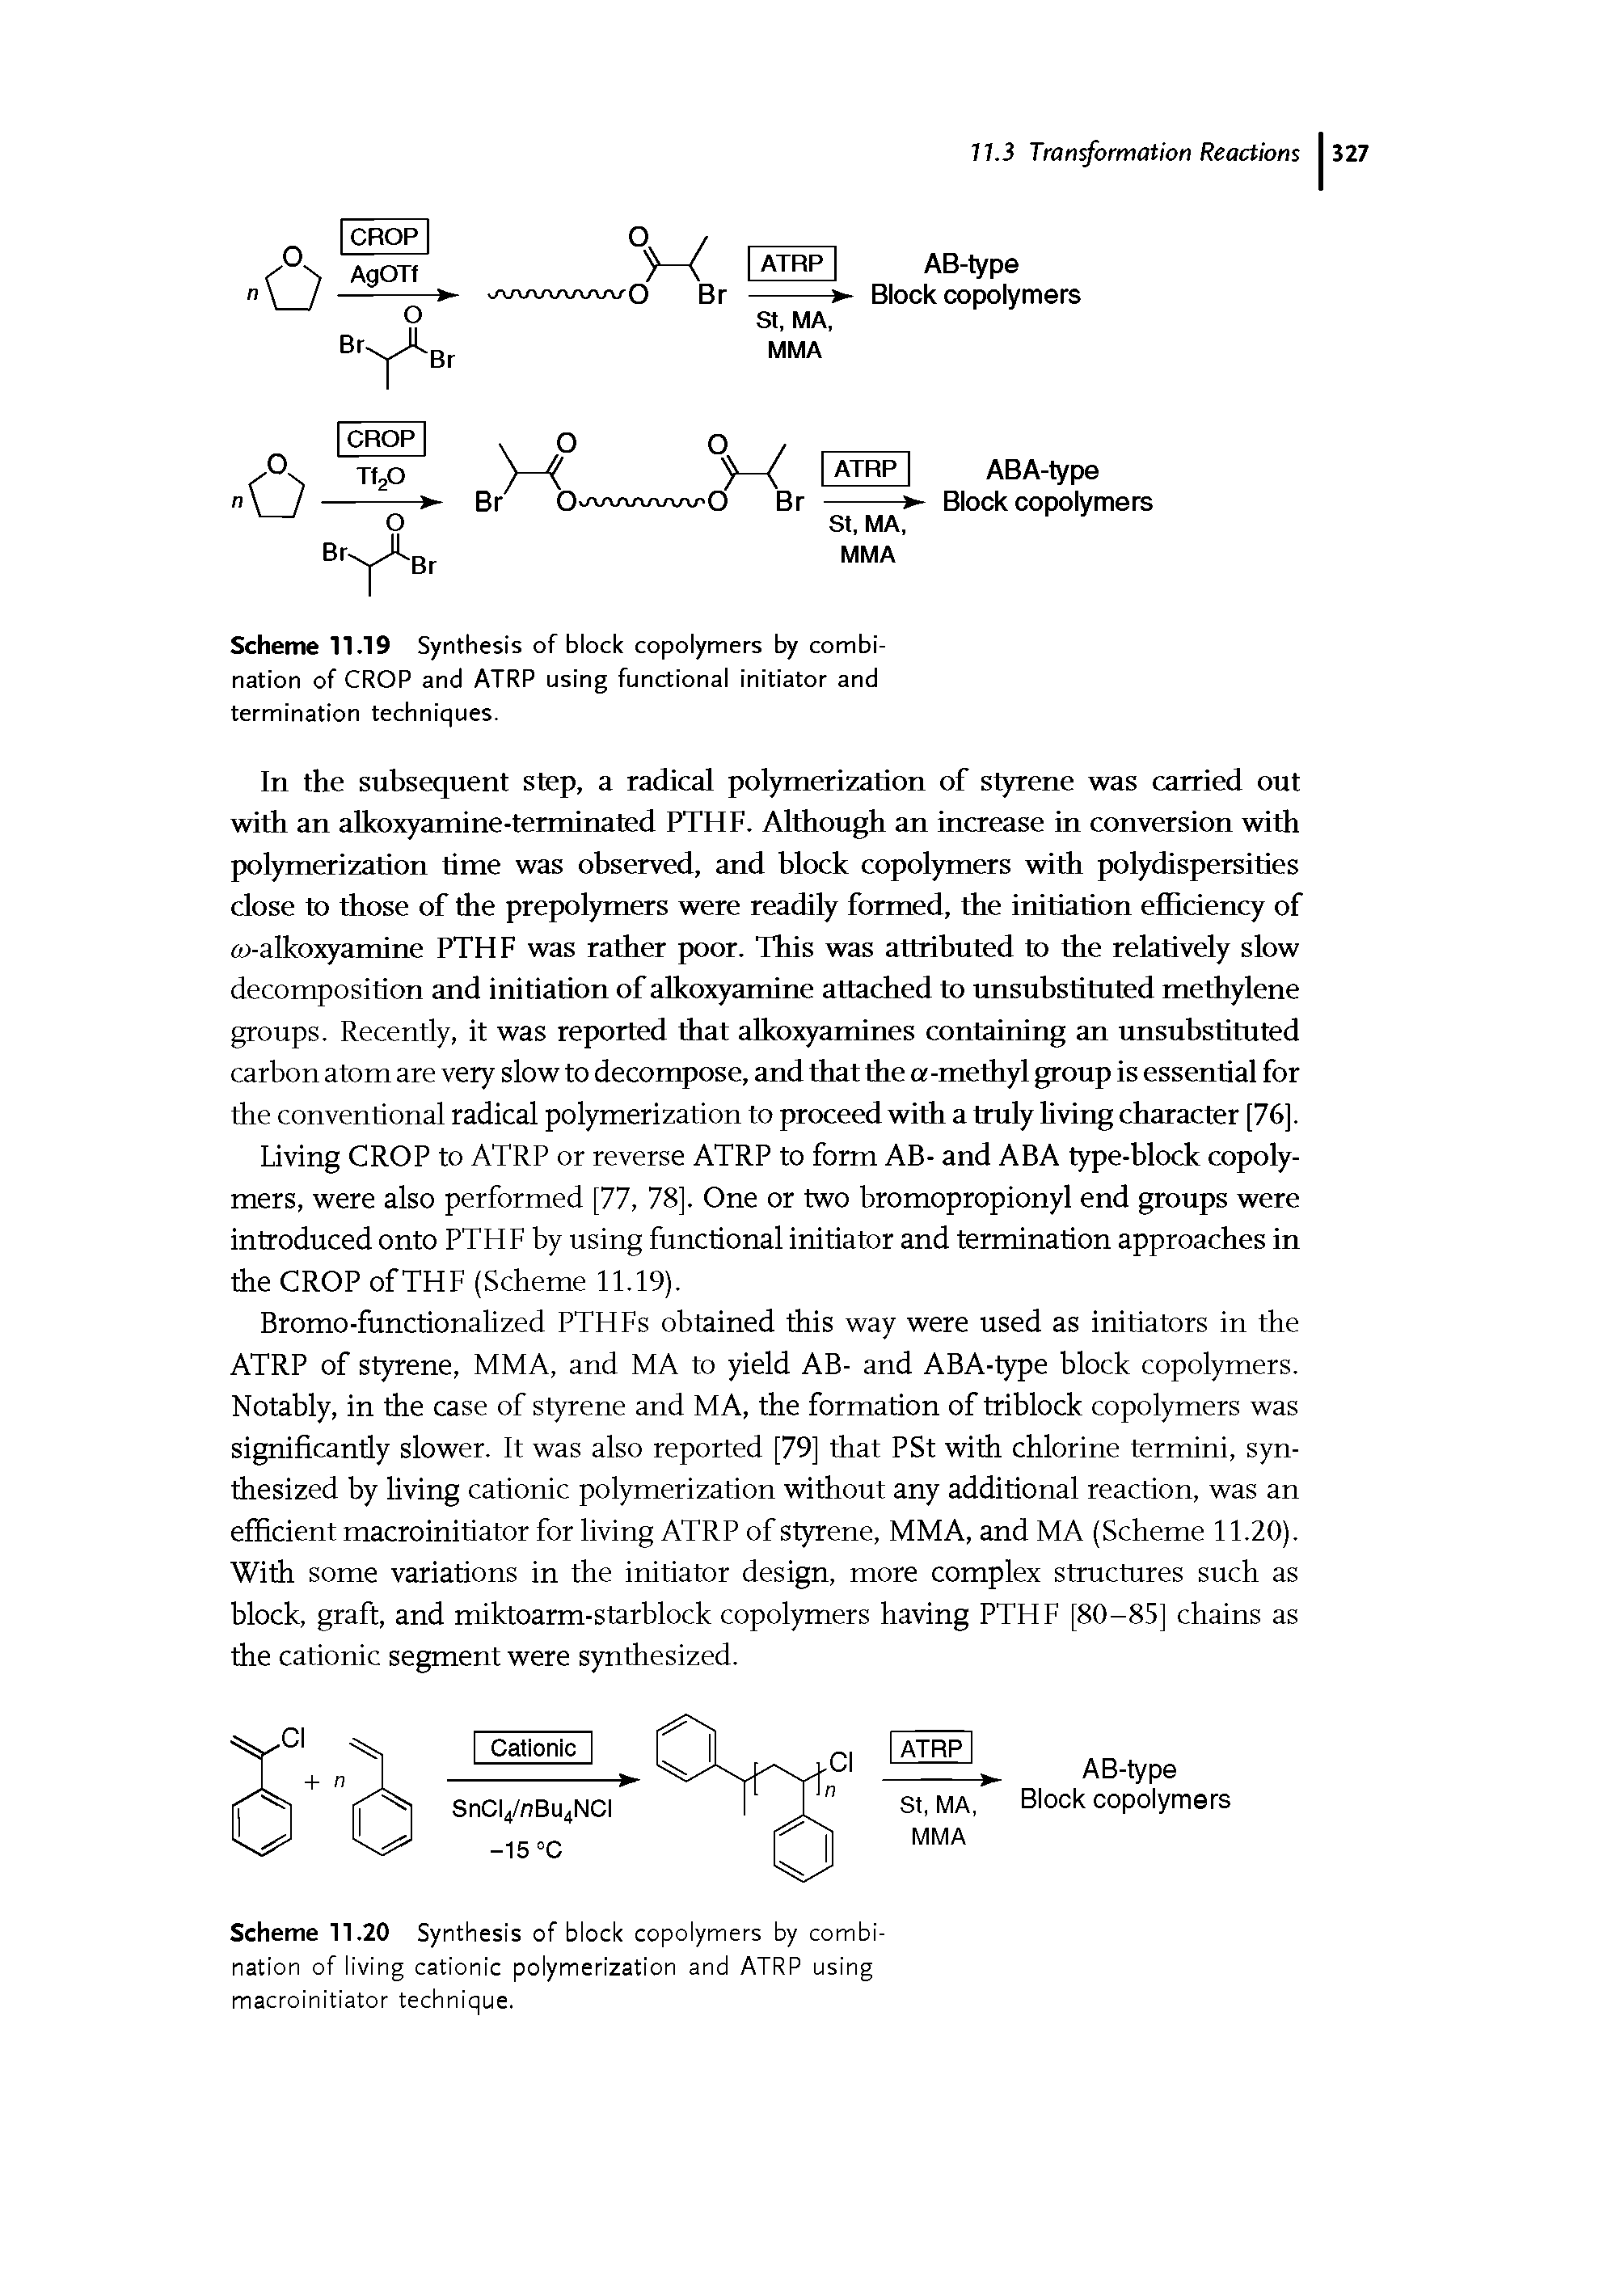 Scheme 11.20 Synthesis of block copolymers by combination of living cationic polymerization and ATRP using macroinitiator technique.